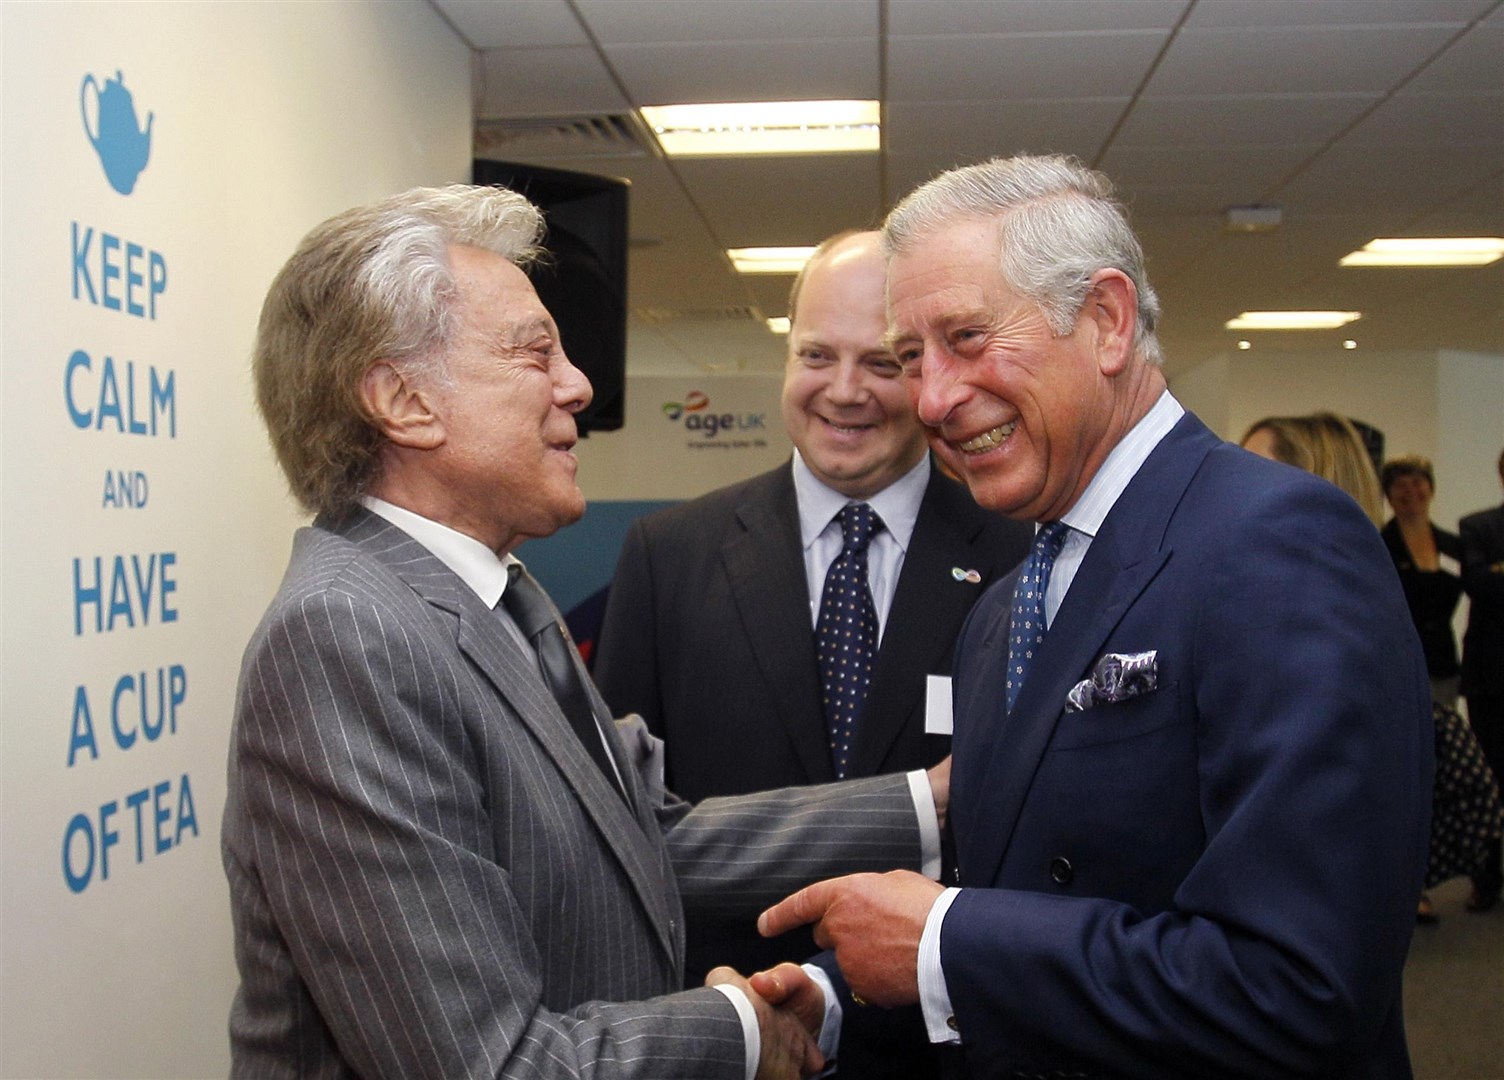 Lionel Blair meeting the Prince of Wales in 2011 (Kirsty Wigglesworth/PA)